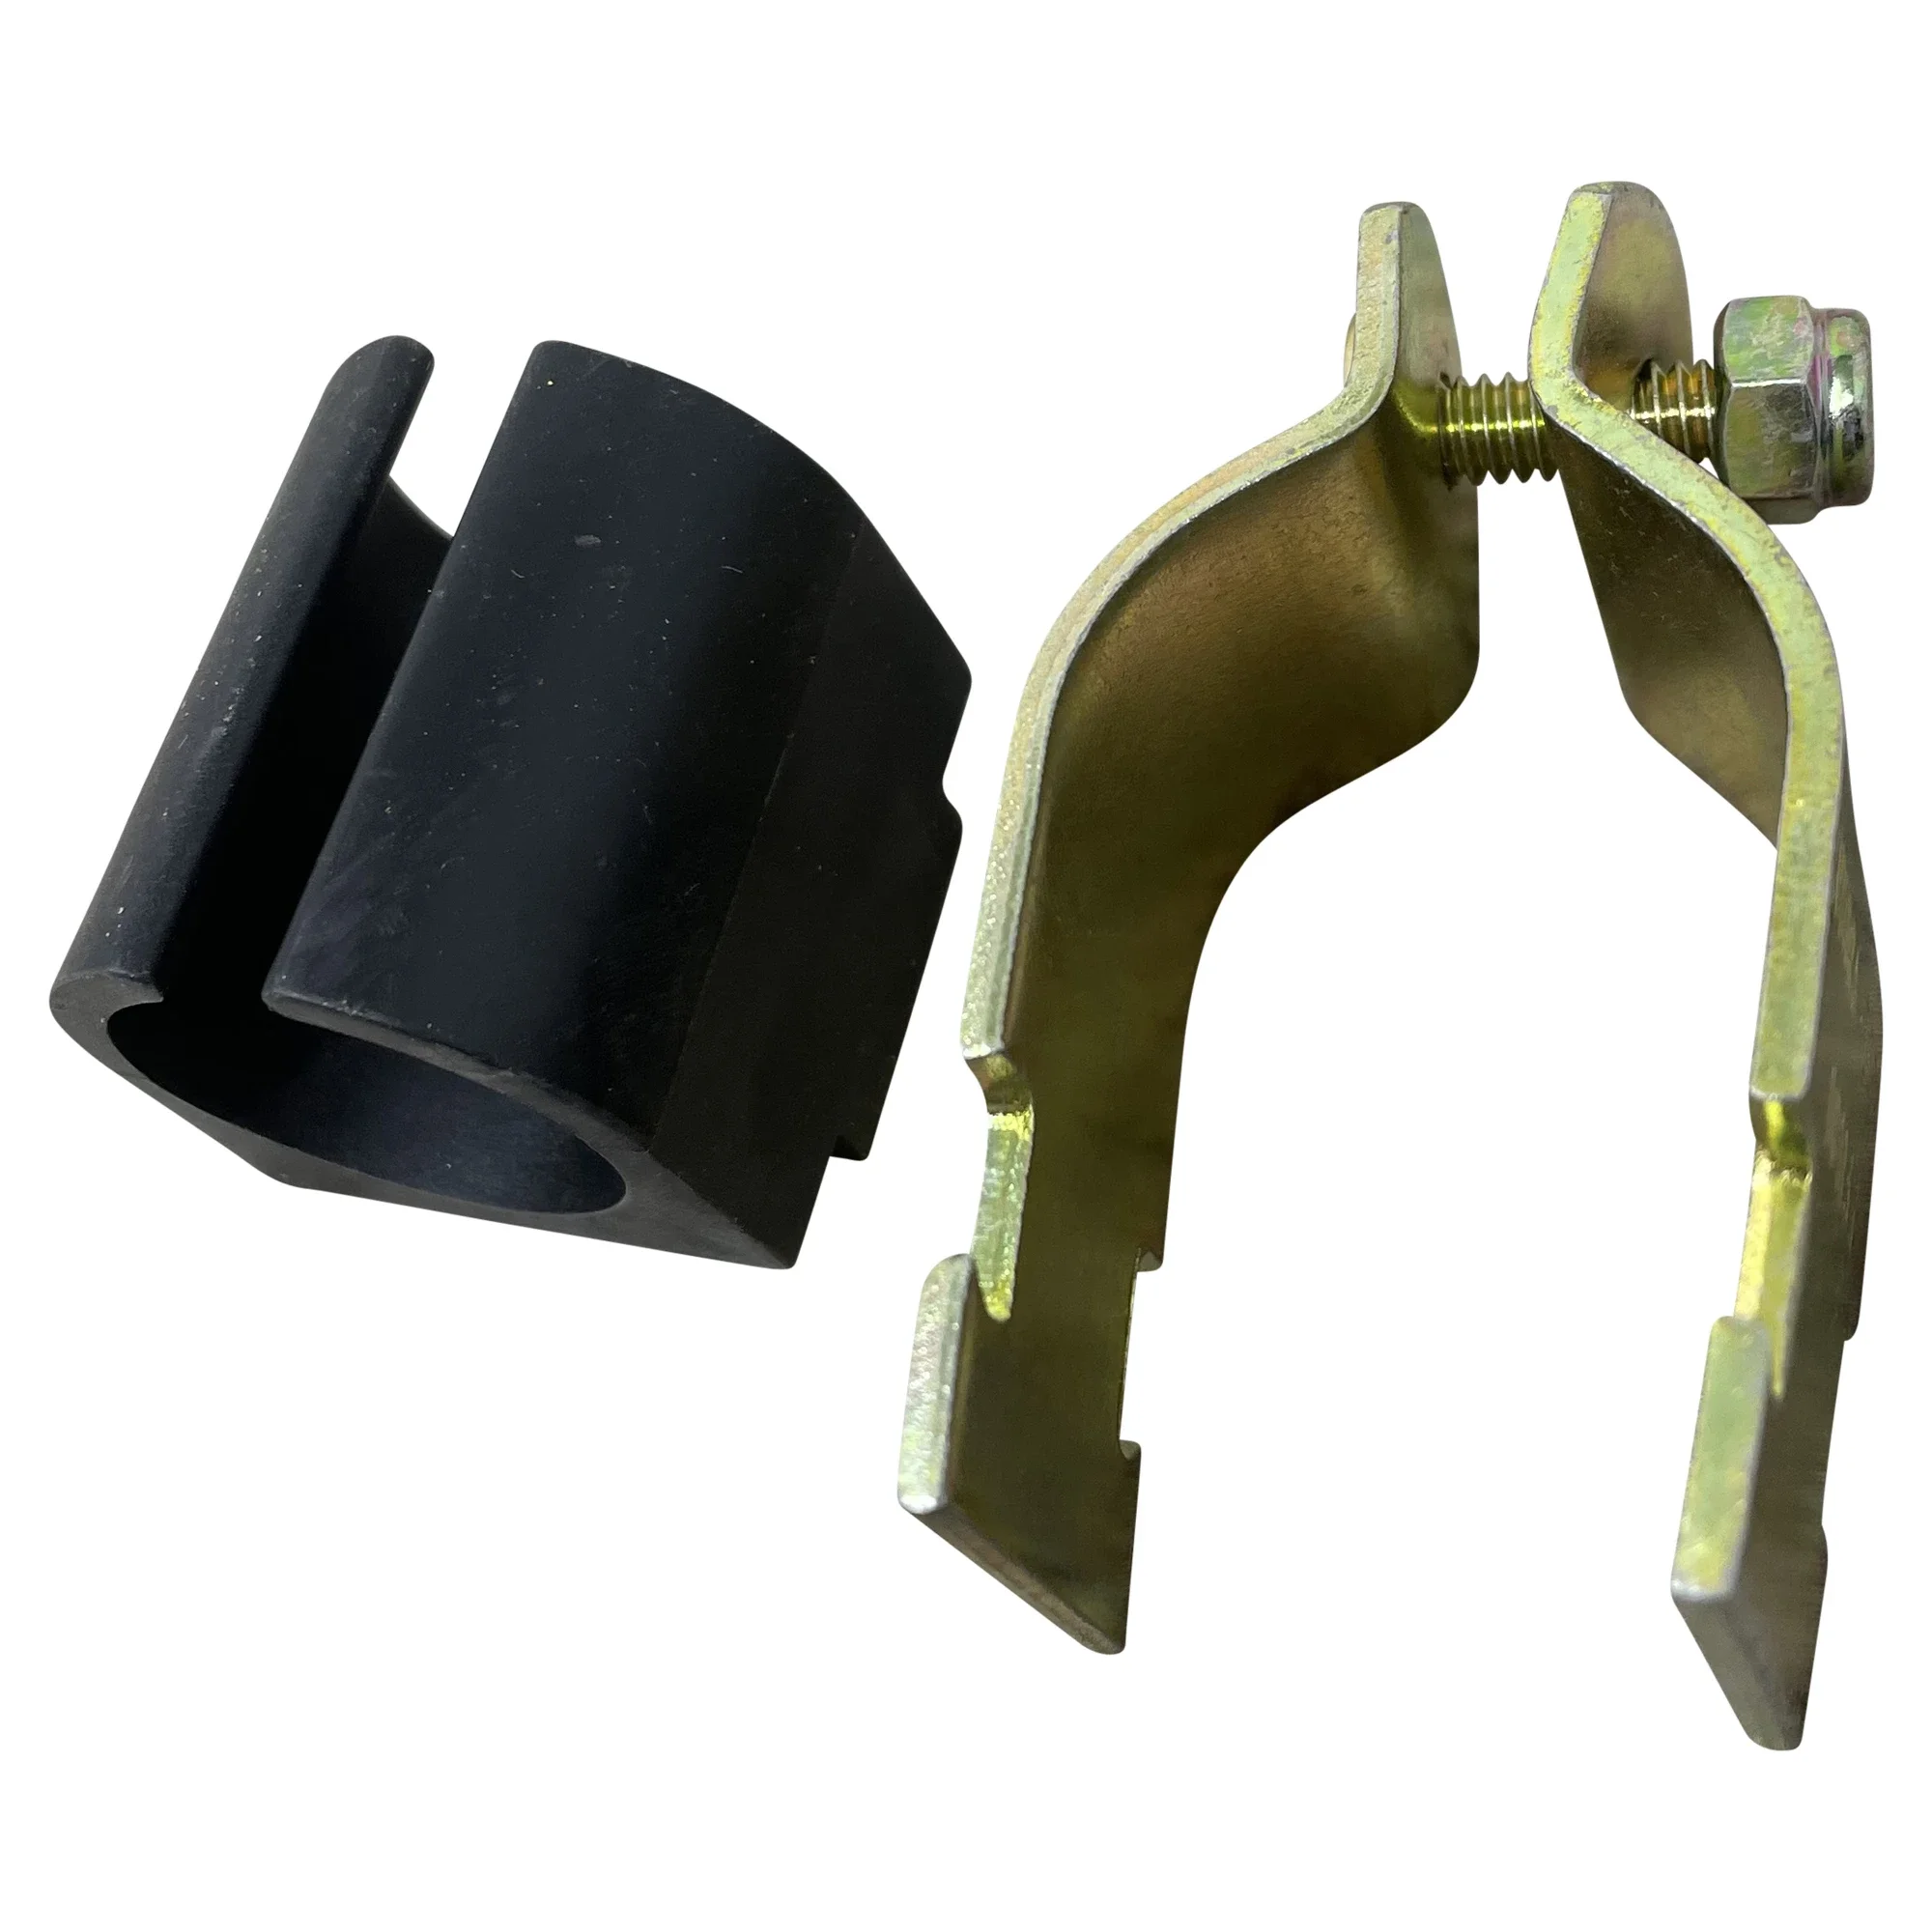 Wastebuilt® Replacement for McNeilus Clamp, 1.125,Hydra 1-1/8"